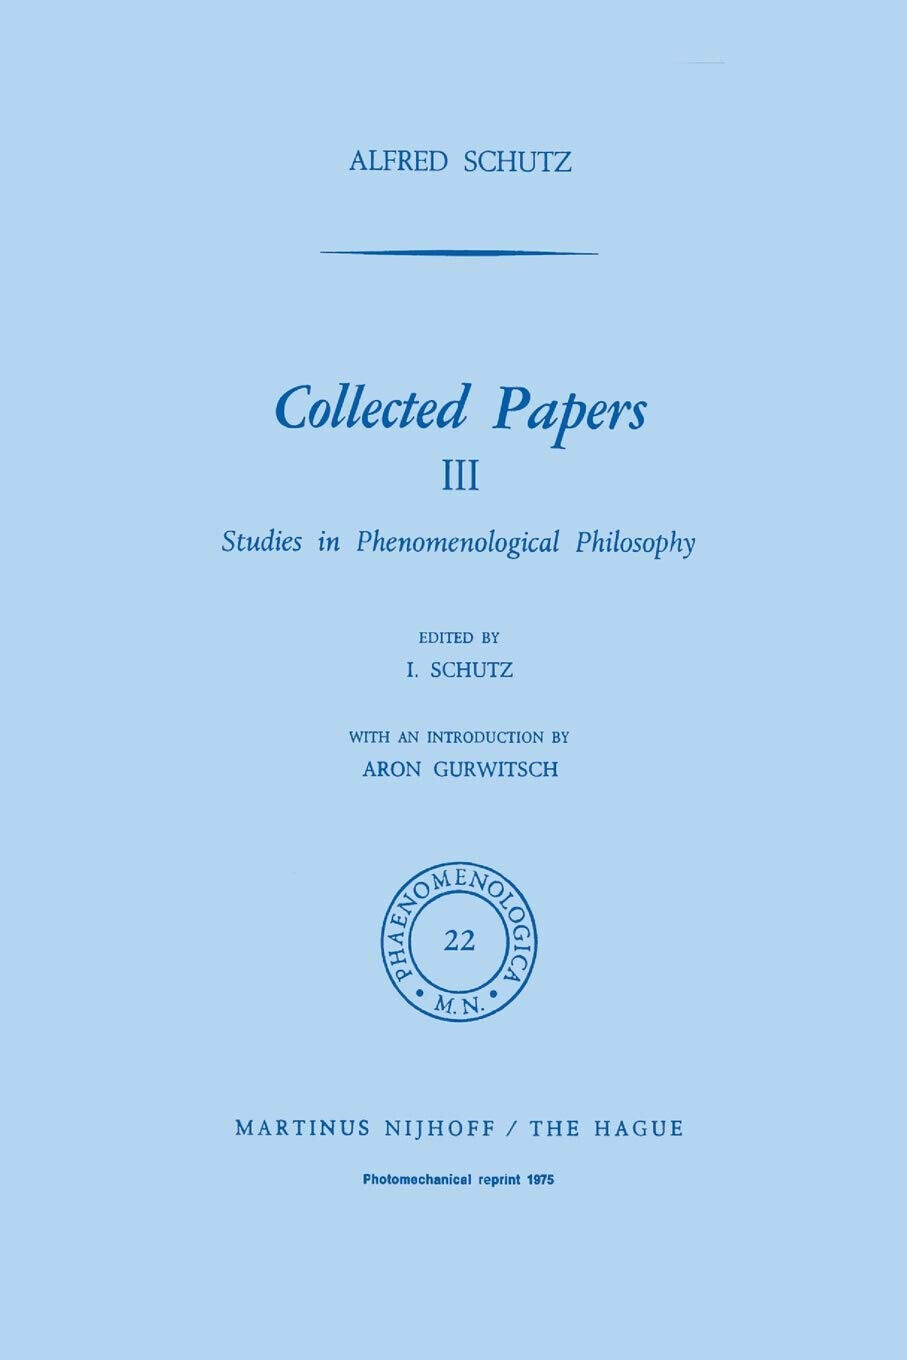 Collected Papers III - A. Schutz - Springer, 1975